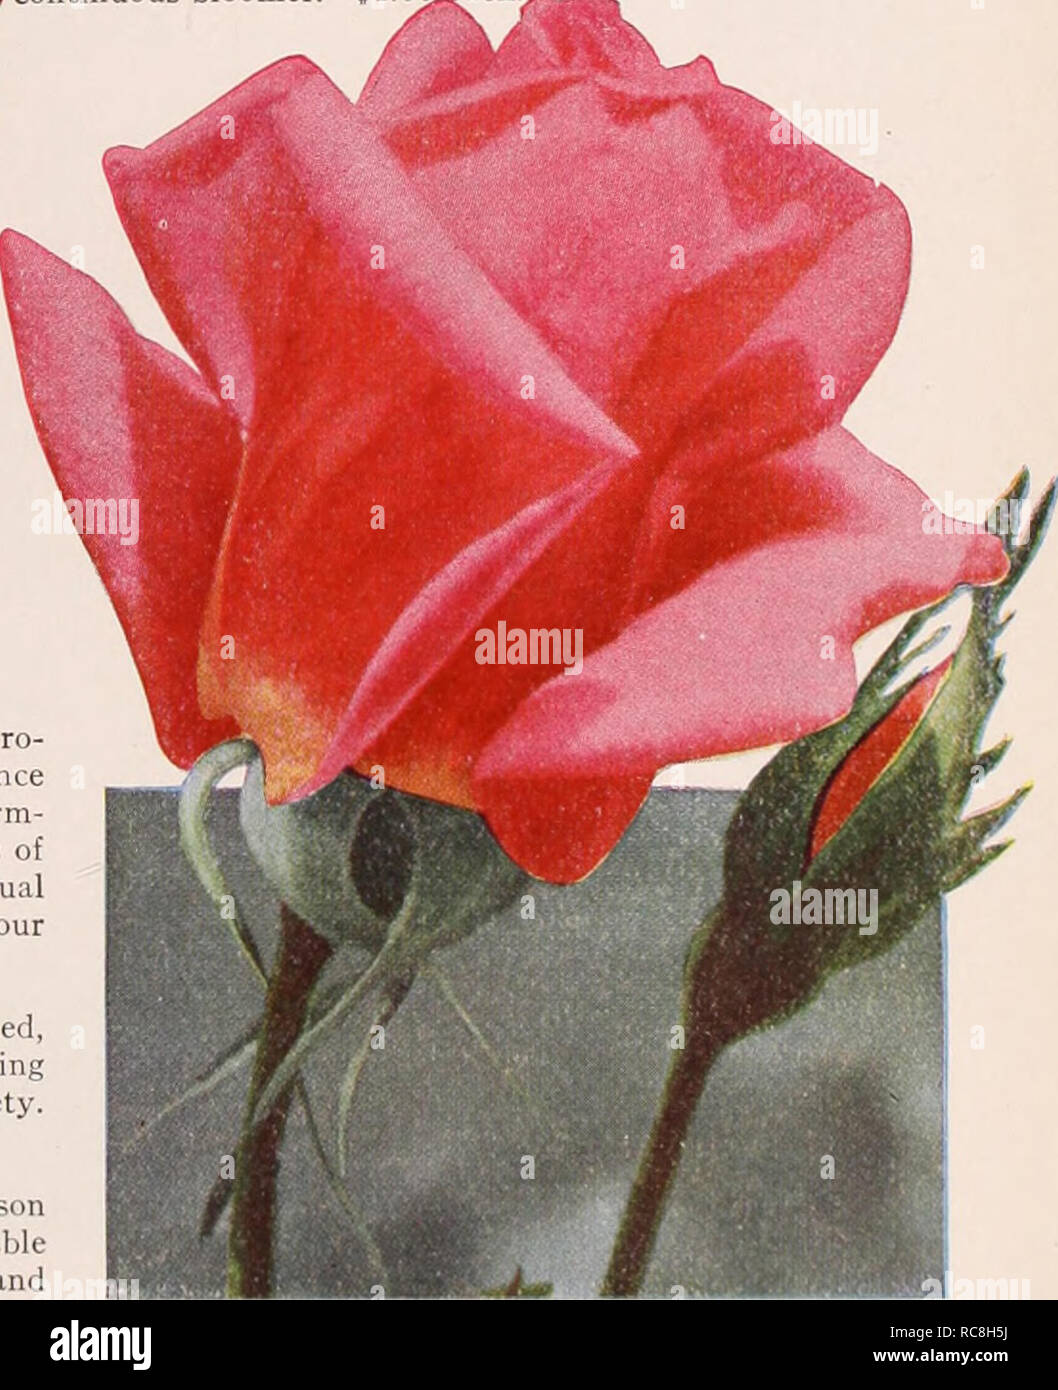 . Dreer's garden book / Henry A. Dreer.. Nursery Catalogue. Hybrid-Tea Rose, Lady Forteviot. See page 123 W. E. Chaplin (Chaplin, 1929). A most meritorious red Rose of the Lord Charlemont type but better being a free vigorous grower with healthy disease-resisting foliage. The bloom is large; every bud develops to a perfect, full, high-centered, very lasting moderately sweet scented flower. Color deep crimson, deepening to carmine crimson; does not blue or burn; these are carried on long strong stems, a very free continuous bloomer. $1.0Qj:ach.^ Hybrid-Tea Rose, Vaterland Vaterland (Plitzer, 19 Stock Photo